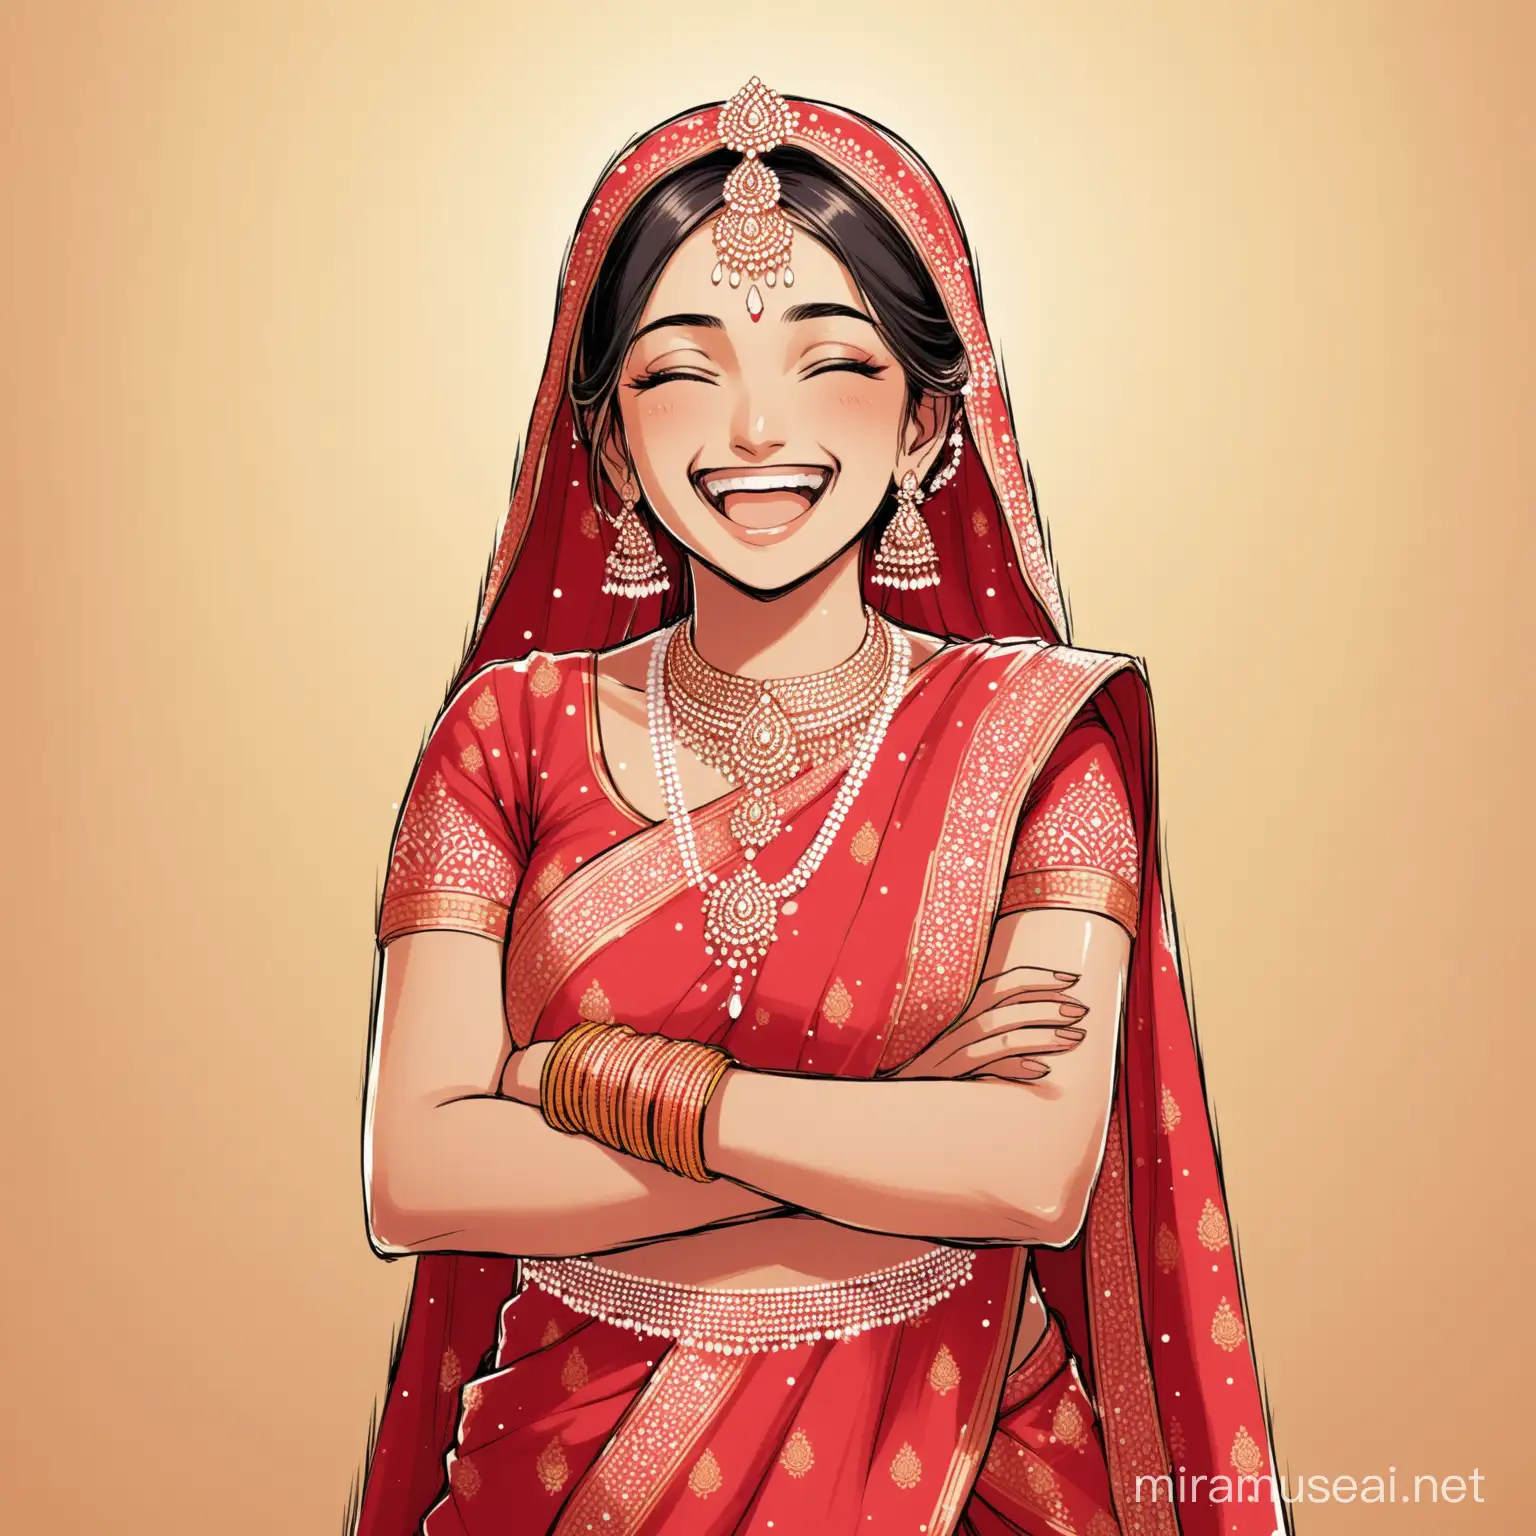 Joyful Indian Bride Laughing with Crossed Arms